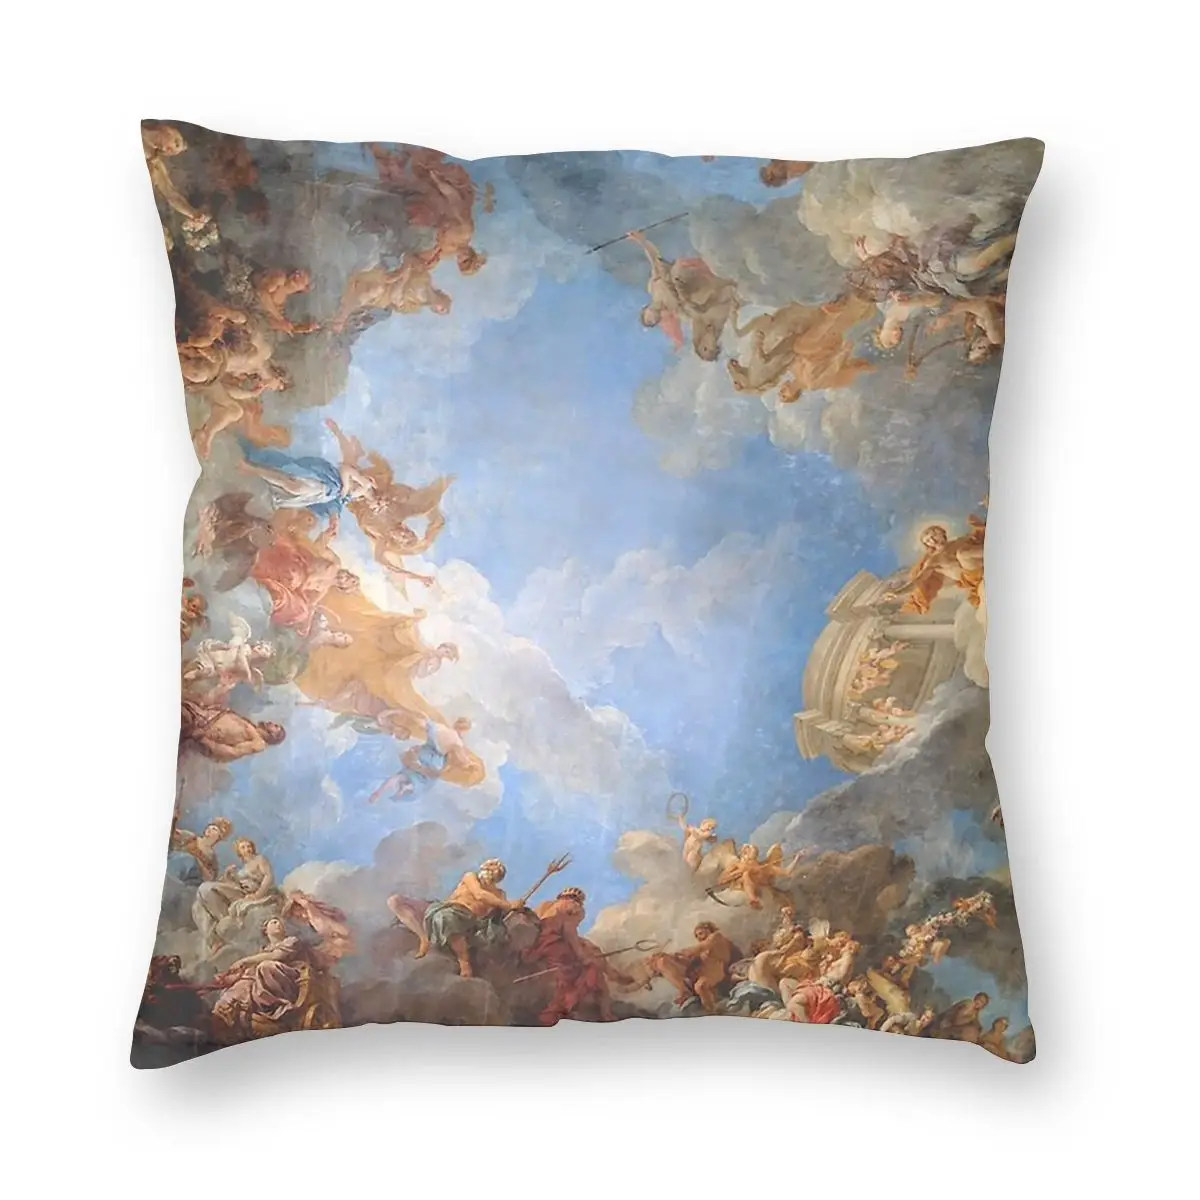 

Fresco of Angels In The Palace of Versailles Pillowcase Decoration Renaissance Cushions Throw Pillow for Sofa Bed Office 18x18in